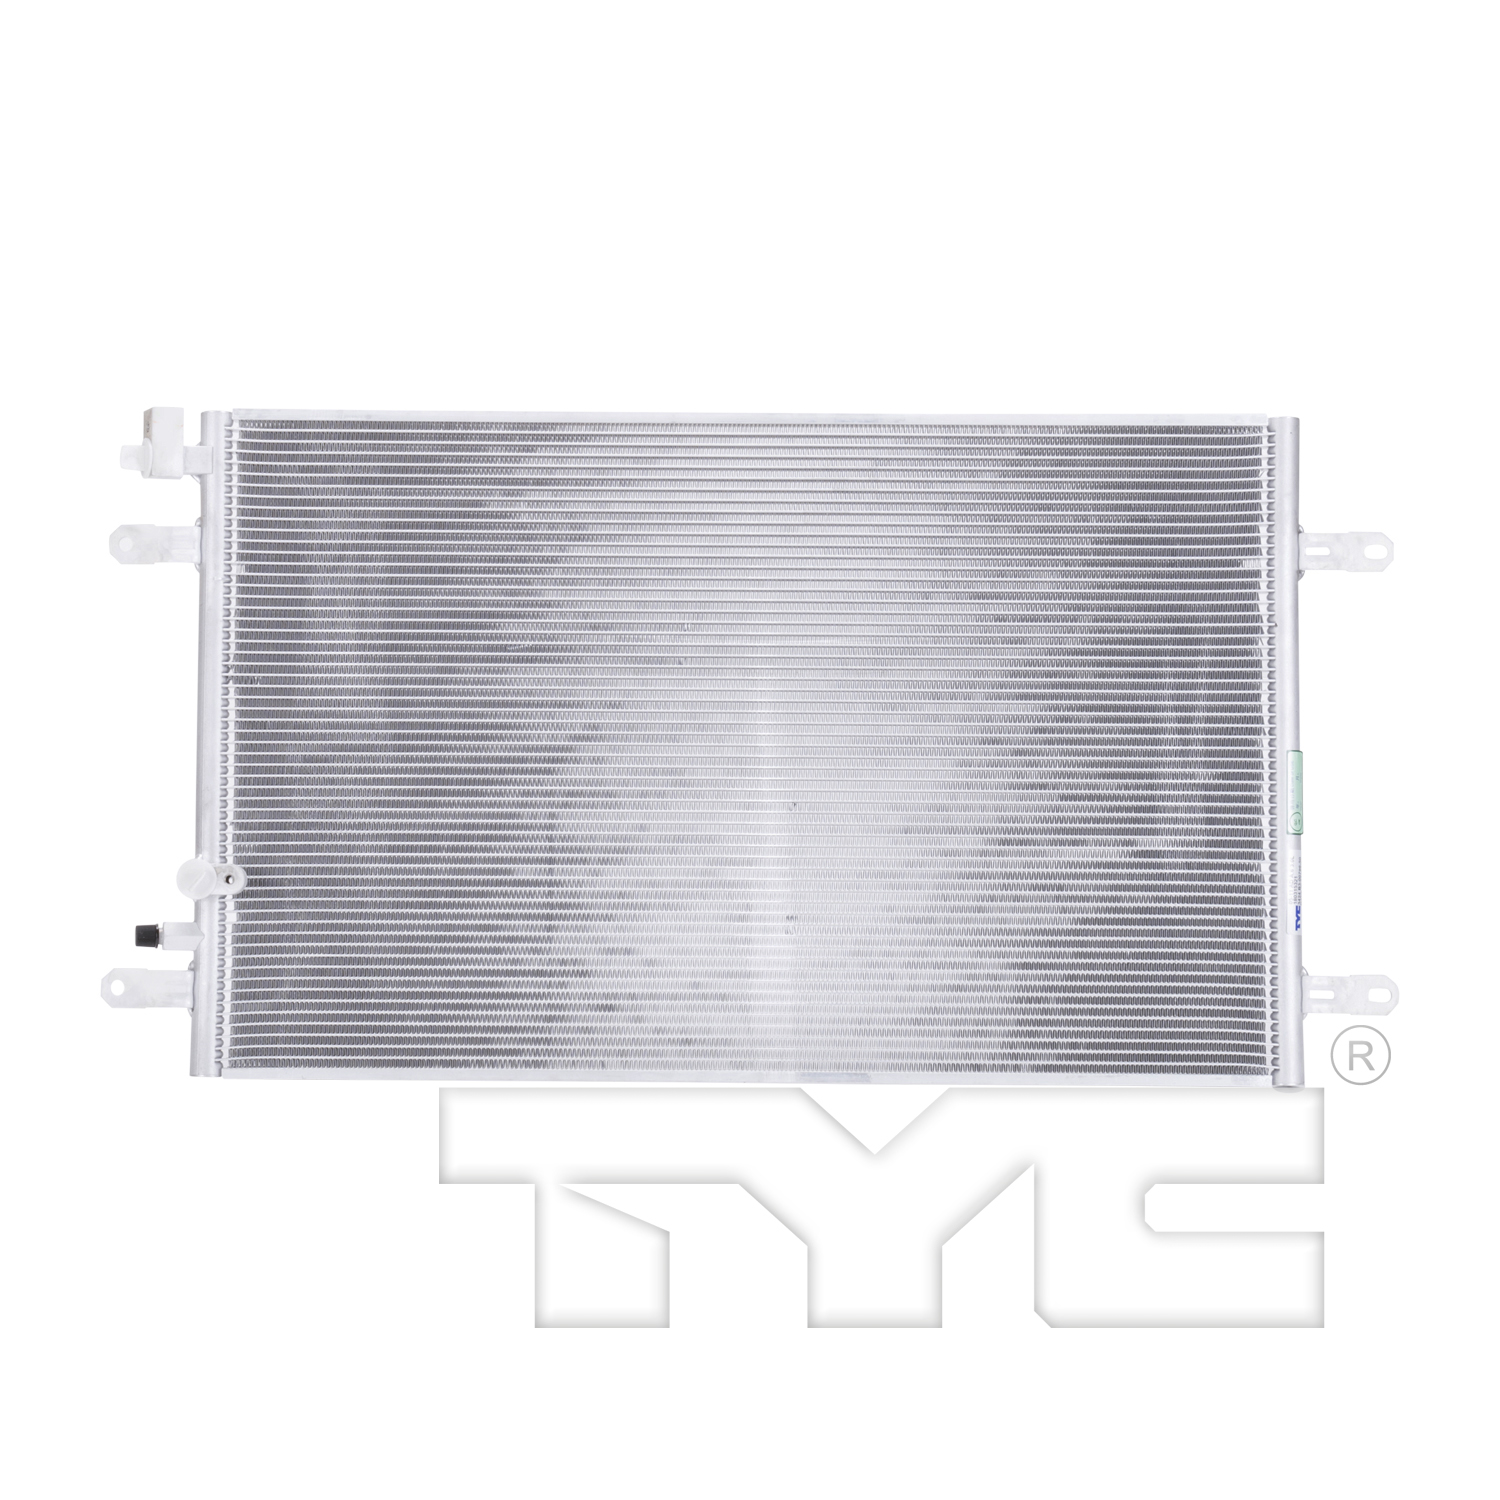 Aftermarket AC CONDENSERS for AUDI - A6, A6,05-11,Air conditioning condenser